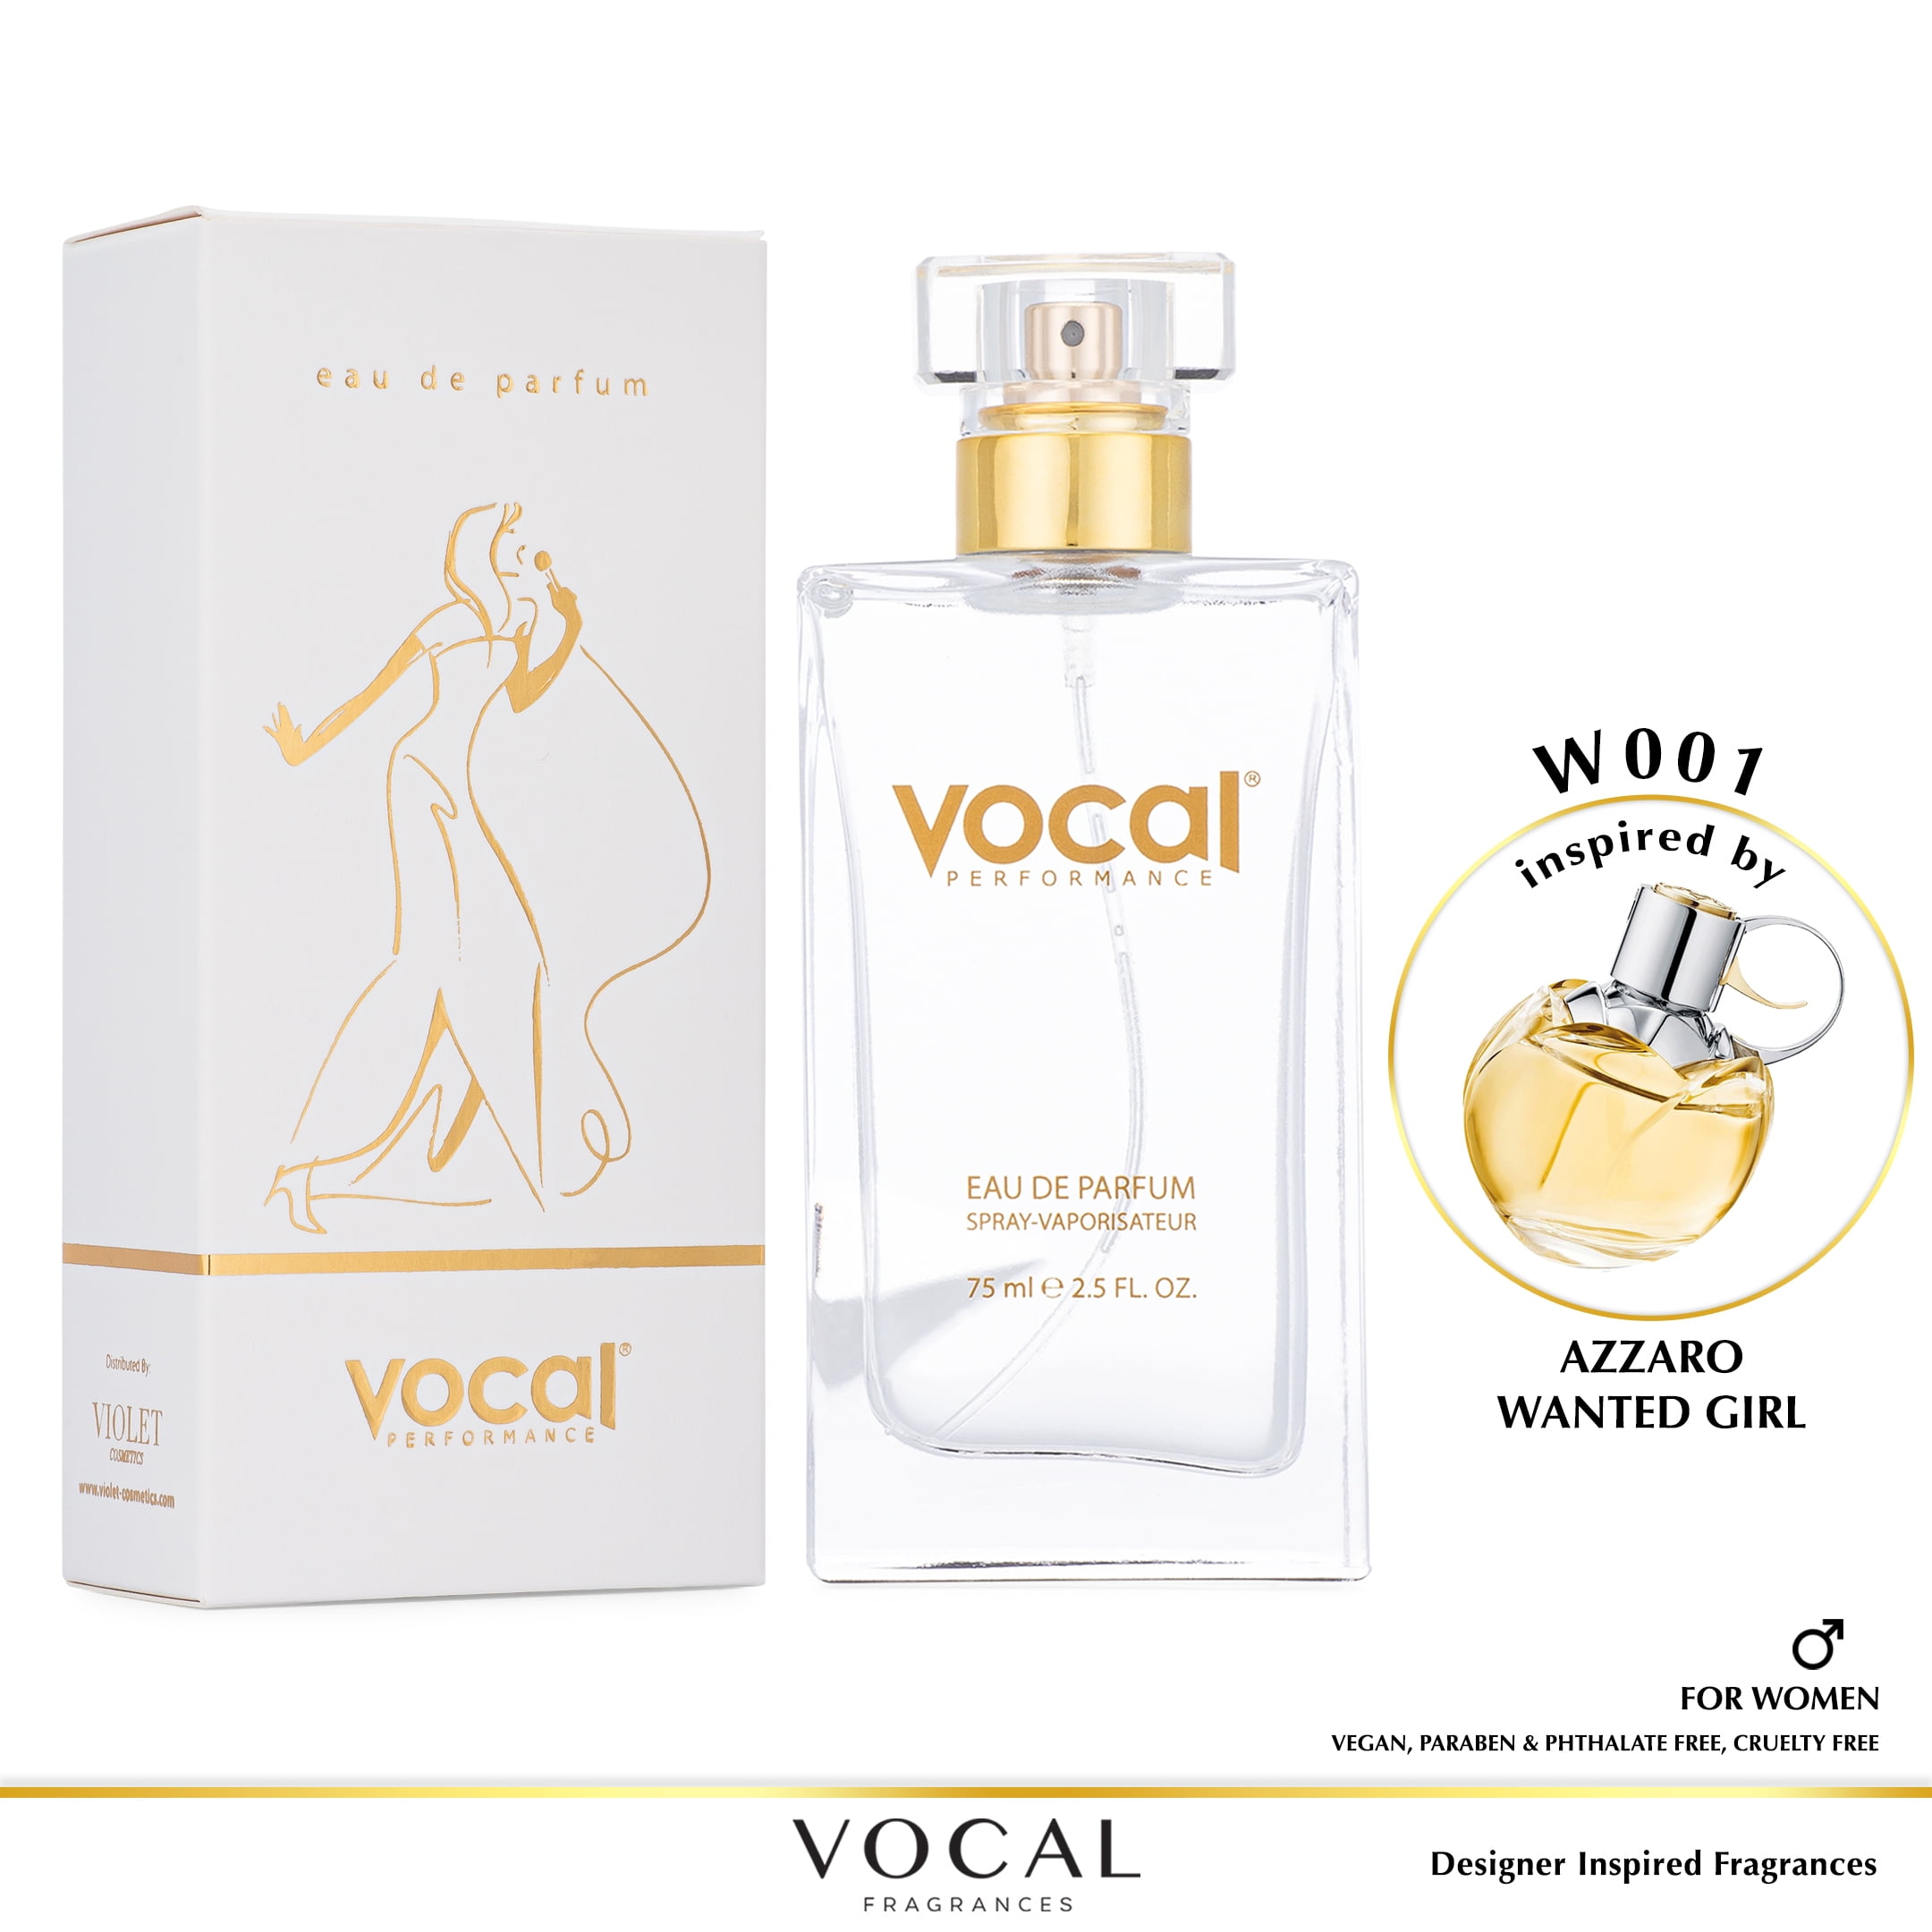 Vocal Fragrance Inspired by Azzaro Wanted Girl Eau de Parfum For Women 2.5  FL. OZ. 75 ml. Vegan, Paraben & Phthalate Free Never Tested on Animals